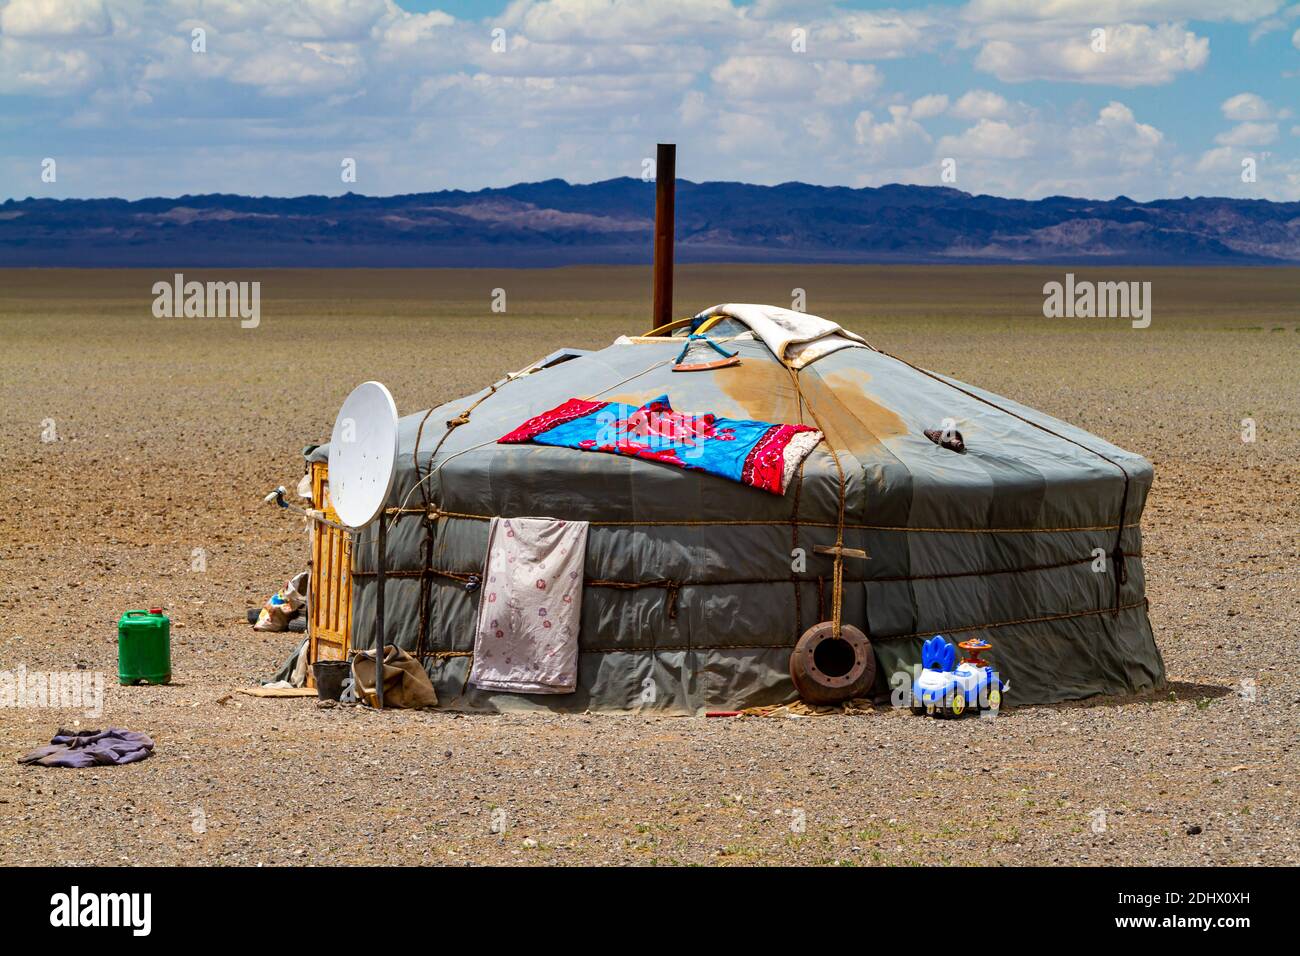 Yurt Camp in the landscape of Mongolia Stock Photo